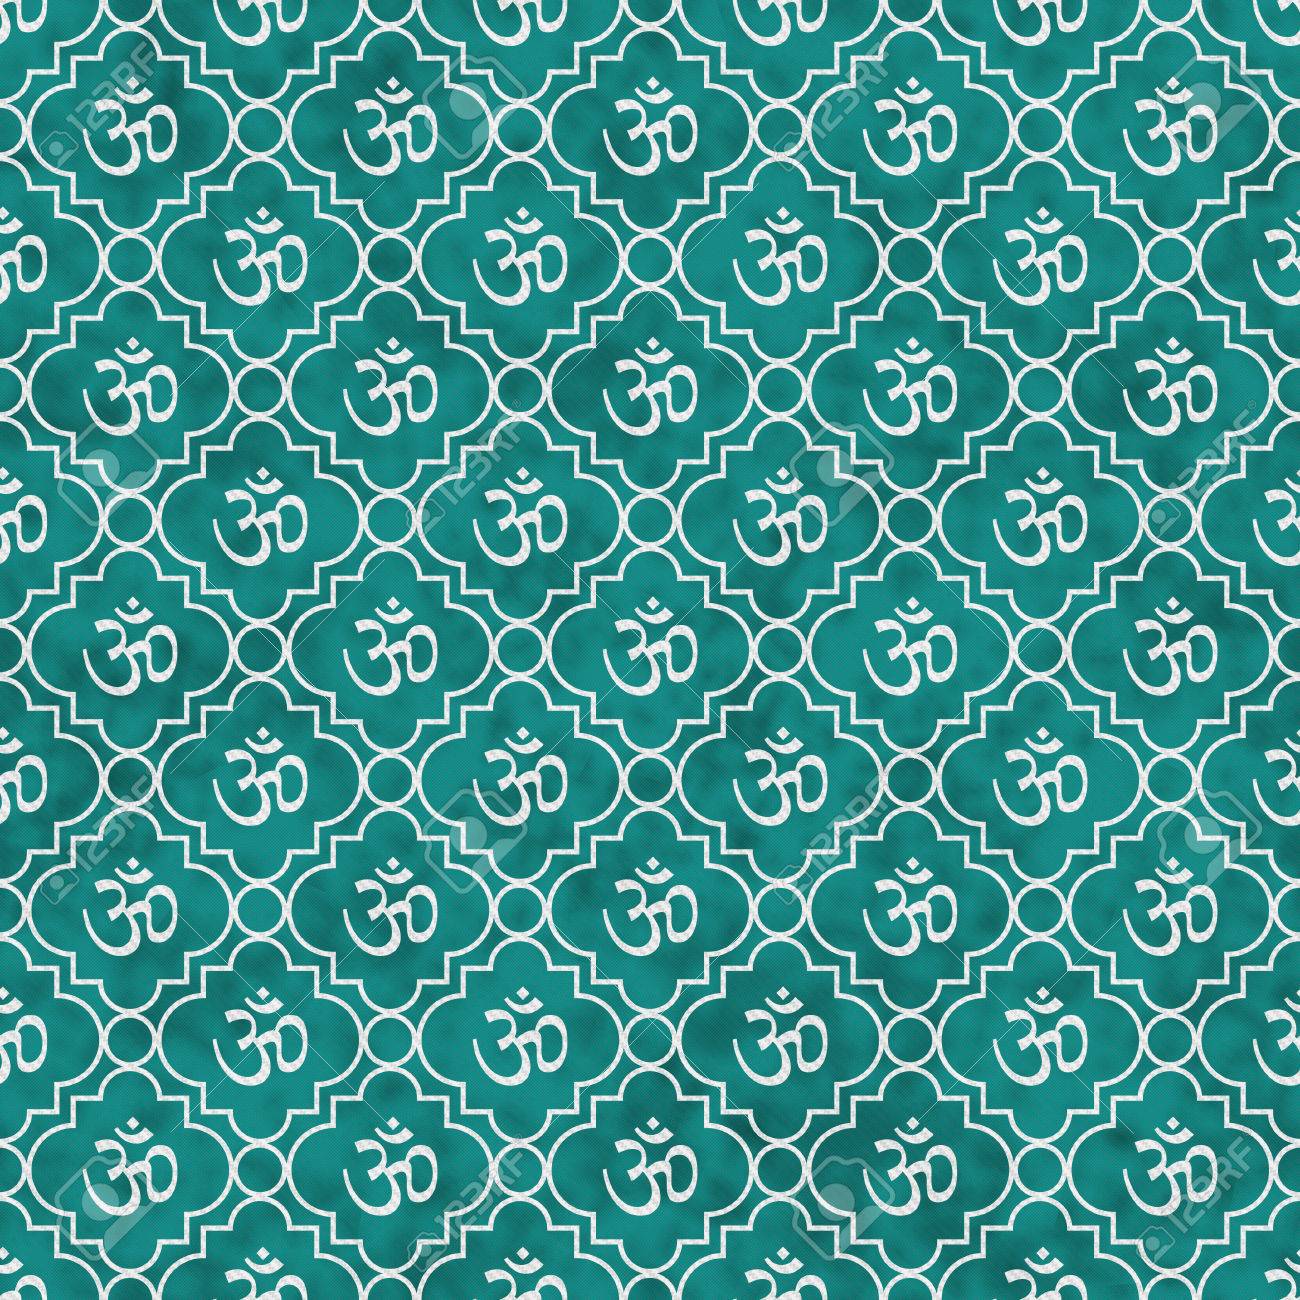 Teal And White Aum Hindu Symbol Tile Pattern Repeat Background